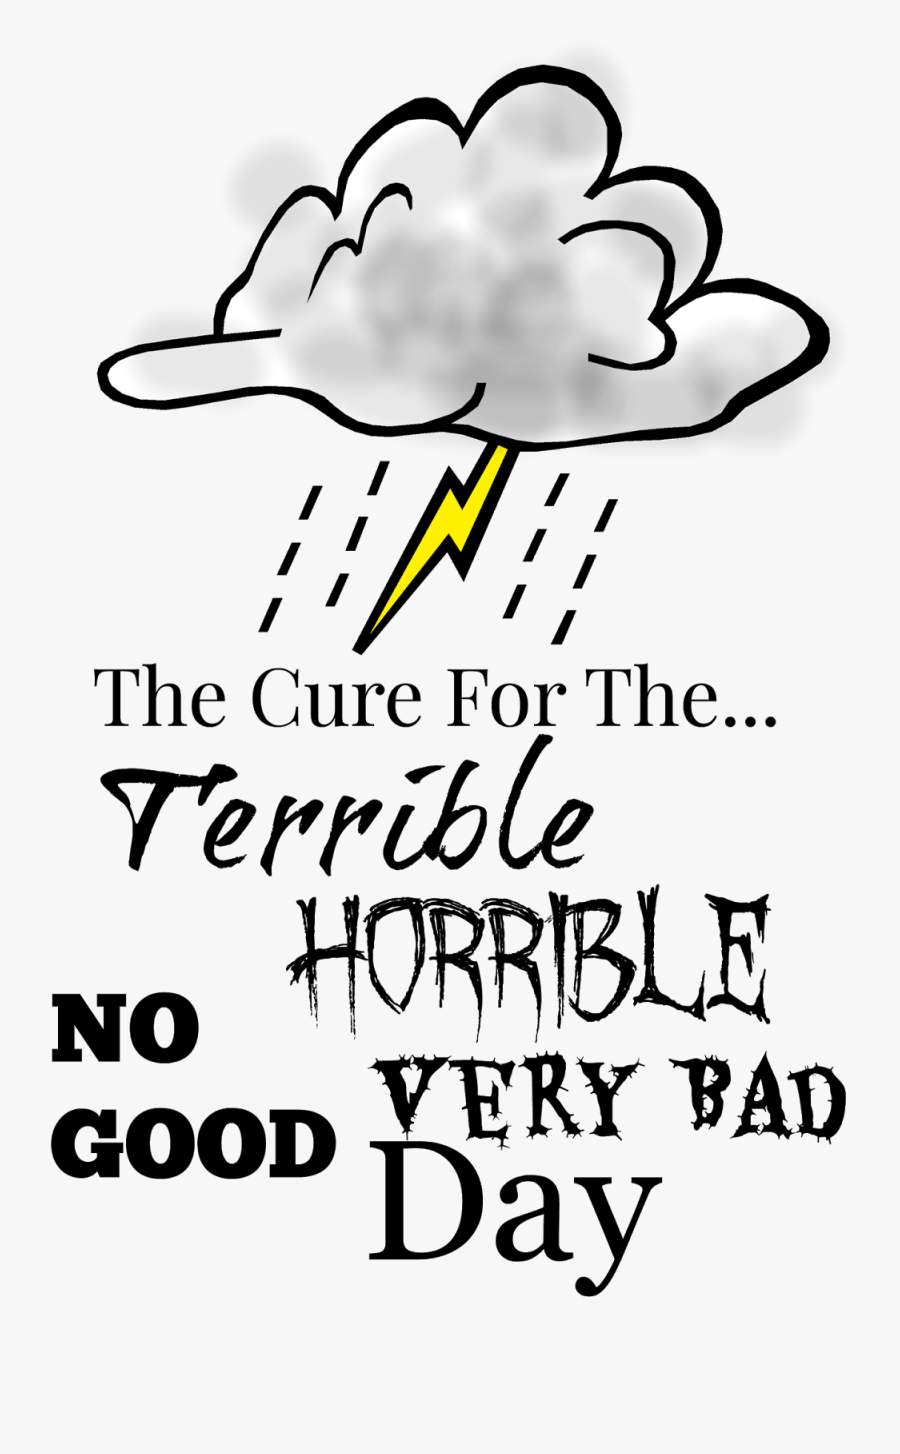 Very Bad Day, Transparent Clipart